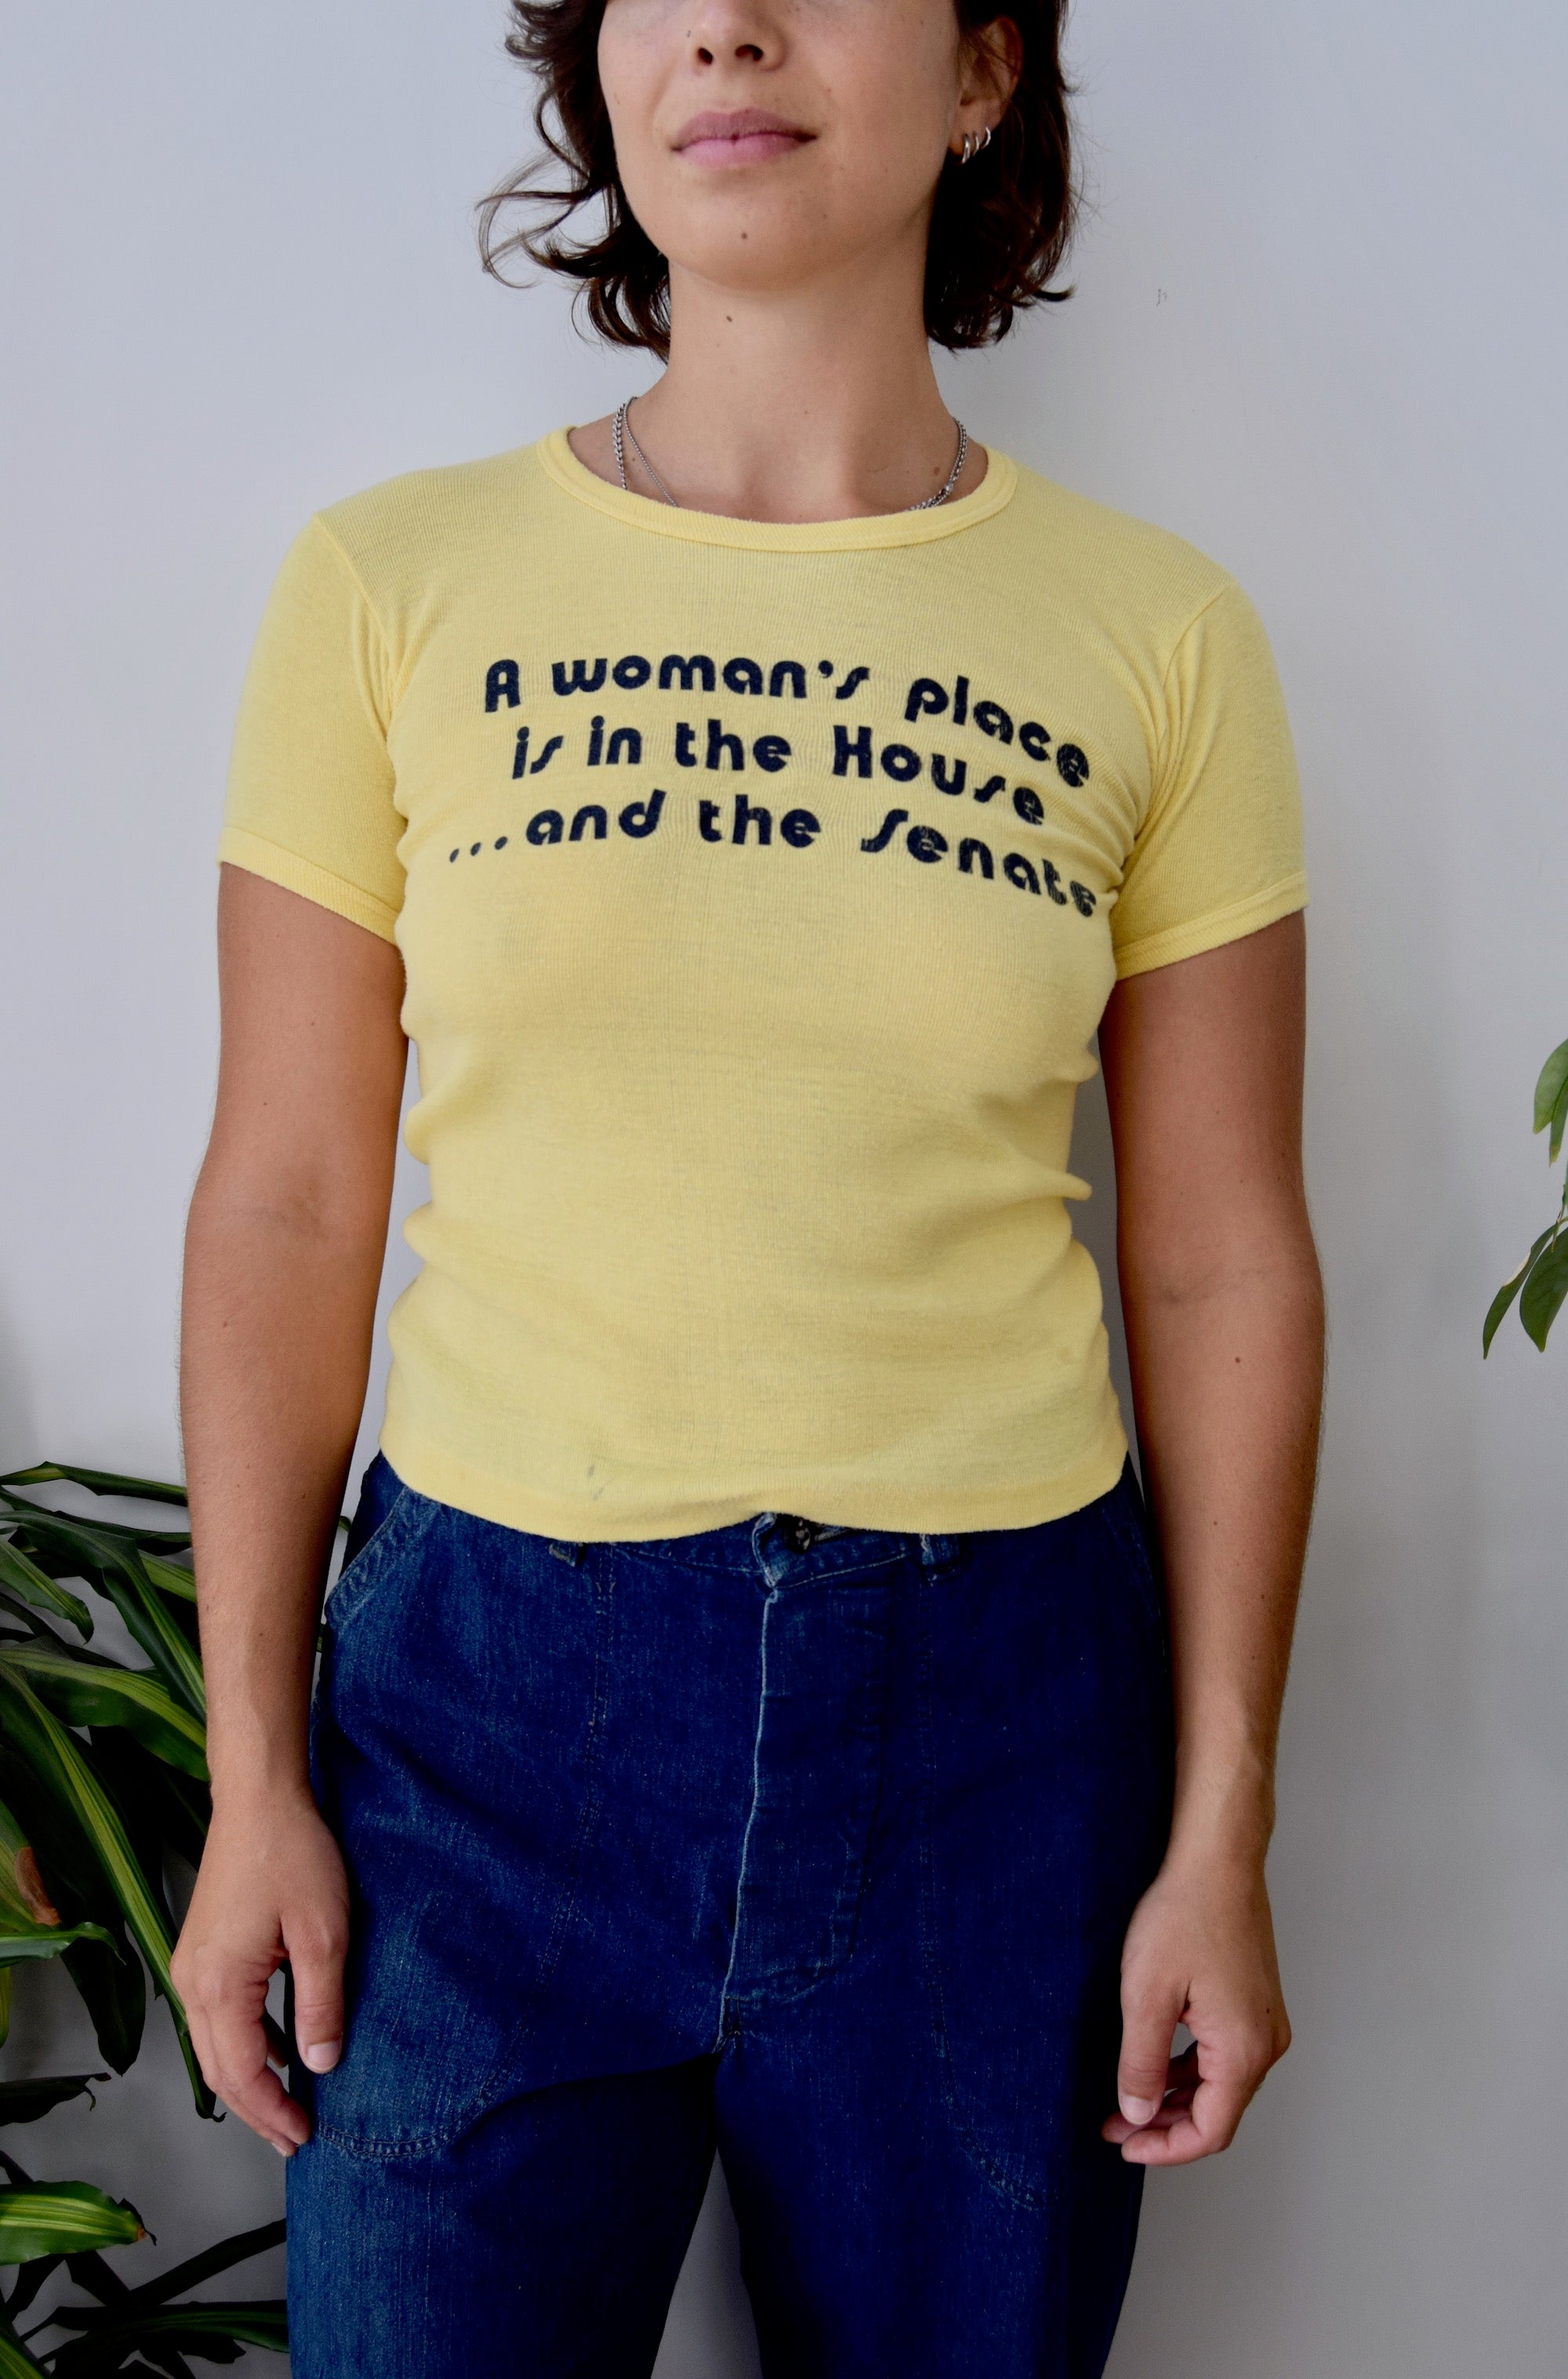 Seventies "A Woman's Place" Tee